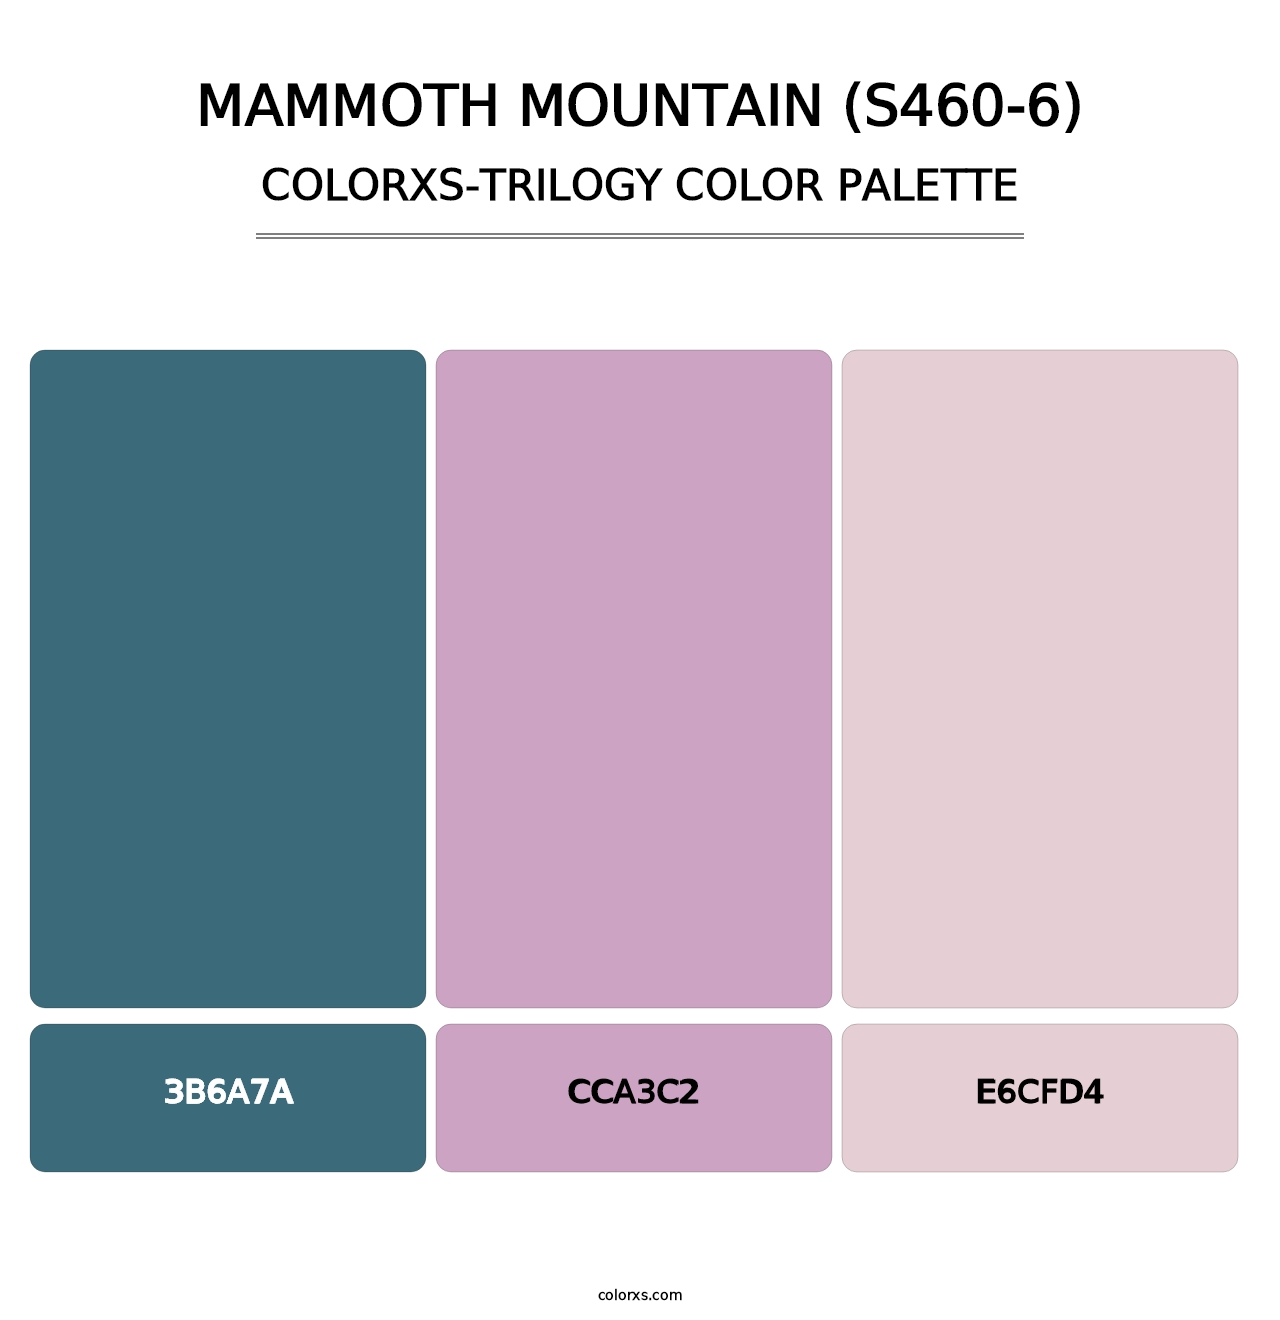 Mammoth Mountain (S460-6) - Colorxs Trilogy Palette